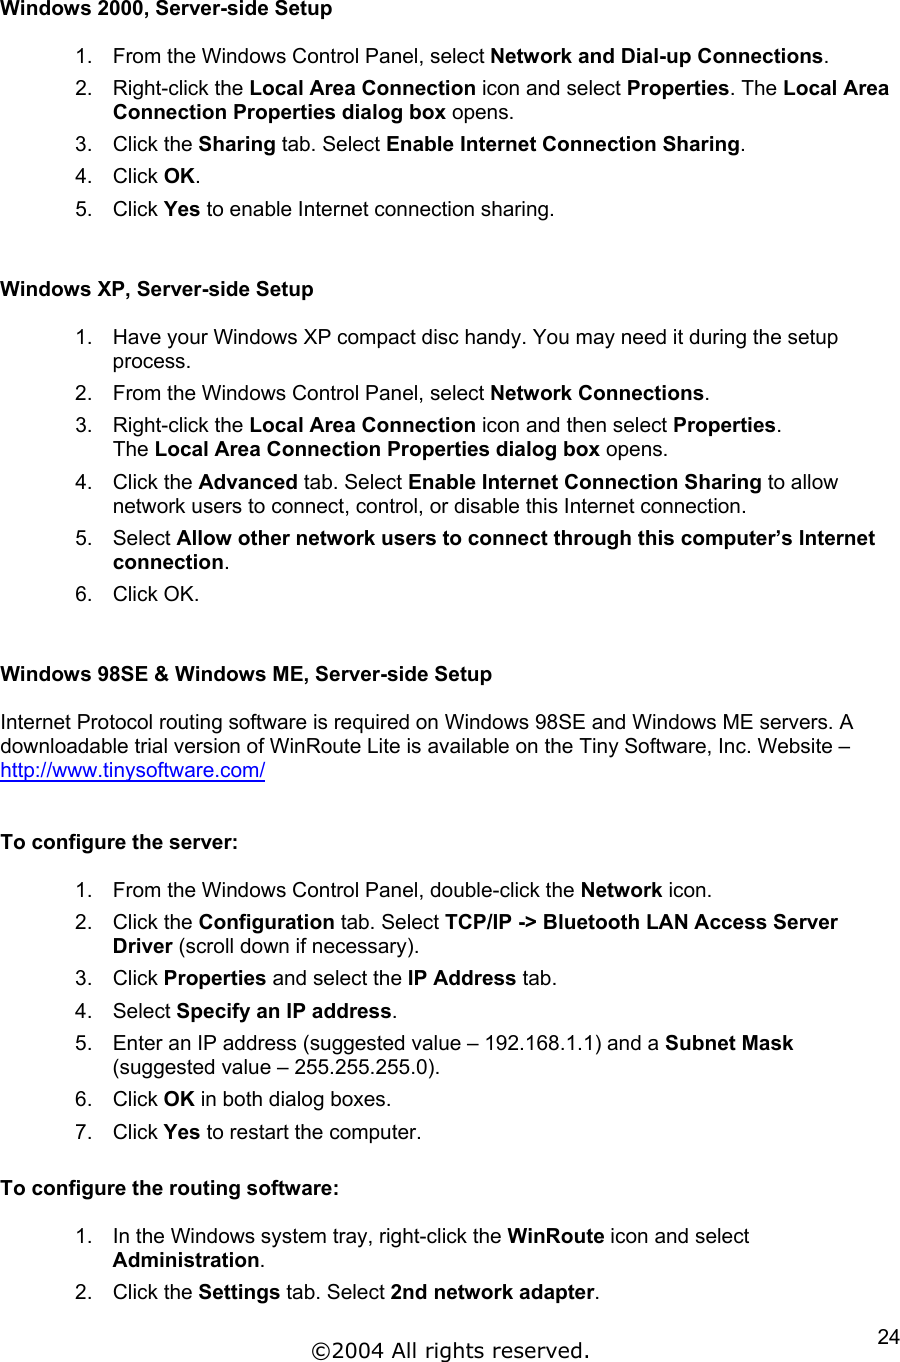  Windows 2000, Server-side Setup  1.  From the Windows Control Panel, select Network and Dial-up Connections. 2. Right-click the Local Area Connection icon and select Properties. The Local Area Connection Properties dialog box opens.  3. Click the Sharing tab. Select Enable Internet Connection Sharing.  4. Click OK. 5. Click Yes to enable Internet connection sharing.   Windows XP, Server-side Setup  1.  Have your Windows XP compact disc handy. You may need it during the setup process. 2.  From the Windows Control Panel, select Network Connections. 3. Right-click the Local Area Connection icon and then select Properties. The Local Area Connection Properties dialog box opens.  4. Click the Advanced tab. Select Enable Internet Connection Sharing to allow network users to connect, control, or disable this Internet connection. 5. Select Allow other network users to connect through this computer’s Internet connection. 6. Click OK.   Windows 98SE &amp; Windows ME, Server-side Setup  Internet Protocol routing software is required on Windows 98SE and Windows ME servers. A downloadable trial version of WinRoute Lite is available on the Tiny Software, Inc. Website – http://www.tinysoftware.com/  To configure the server:  1.  From the Windows Control Panel, double-click the Network icon. 2. Click the Configuration tab. Select TCP/IP -&gt; Bluetooth LAN Access Server Driver (scroll down if necessary). 3. Click Properties and select the IP Address tab. 4. Select Specify an IP address. 5.  Enter an IP address (suggested value – 192.168.1.1) and a Subnet Mask (suggested value – 255.255.255.0). 6. Click OK in both dialog boxes. 7. Click Yes to restart the computer.  To configure the routing software:  1.  In the Windows system tray, right-click the WinRoute icon and select Administration. 2. Click the Settings tab. Select 2nd network adapter. ©2004 All rights reserved.  24